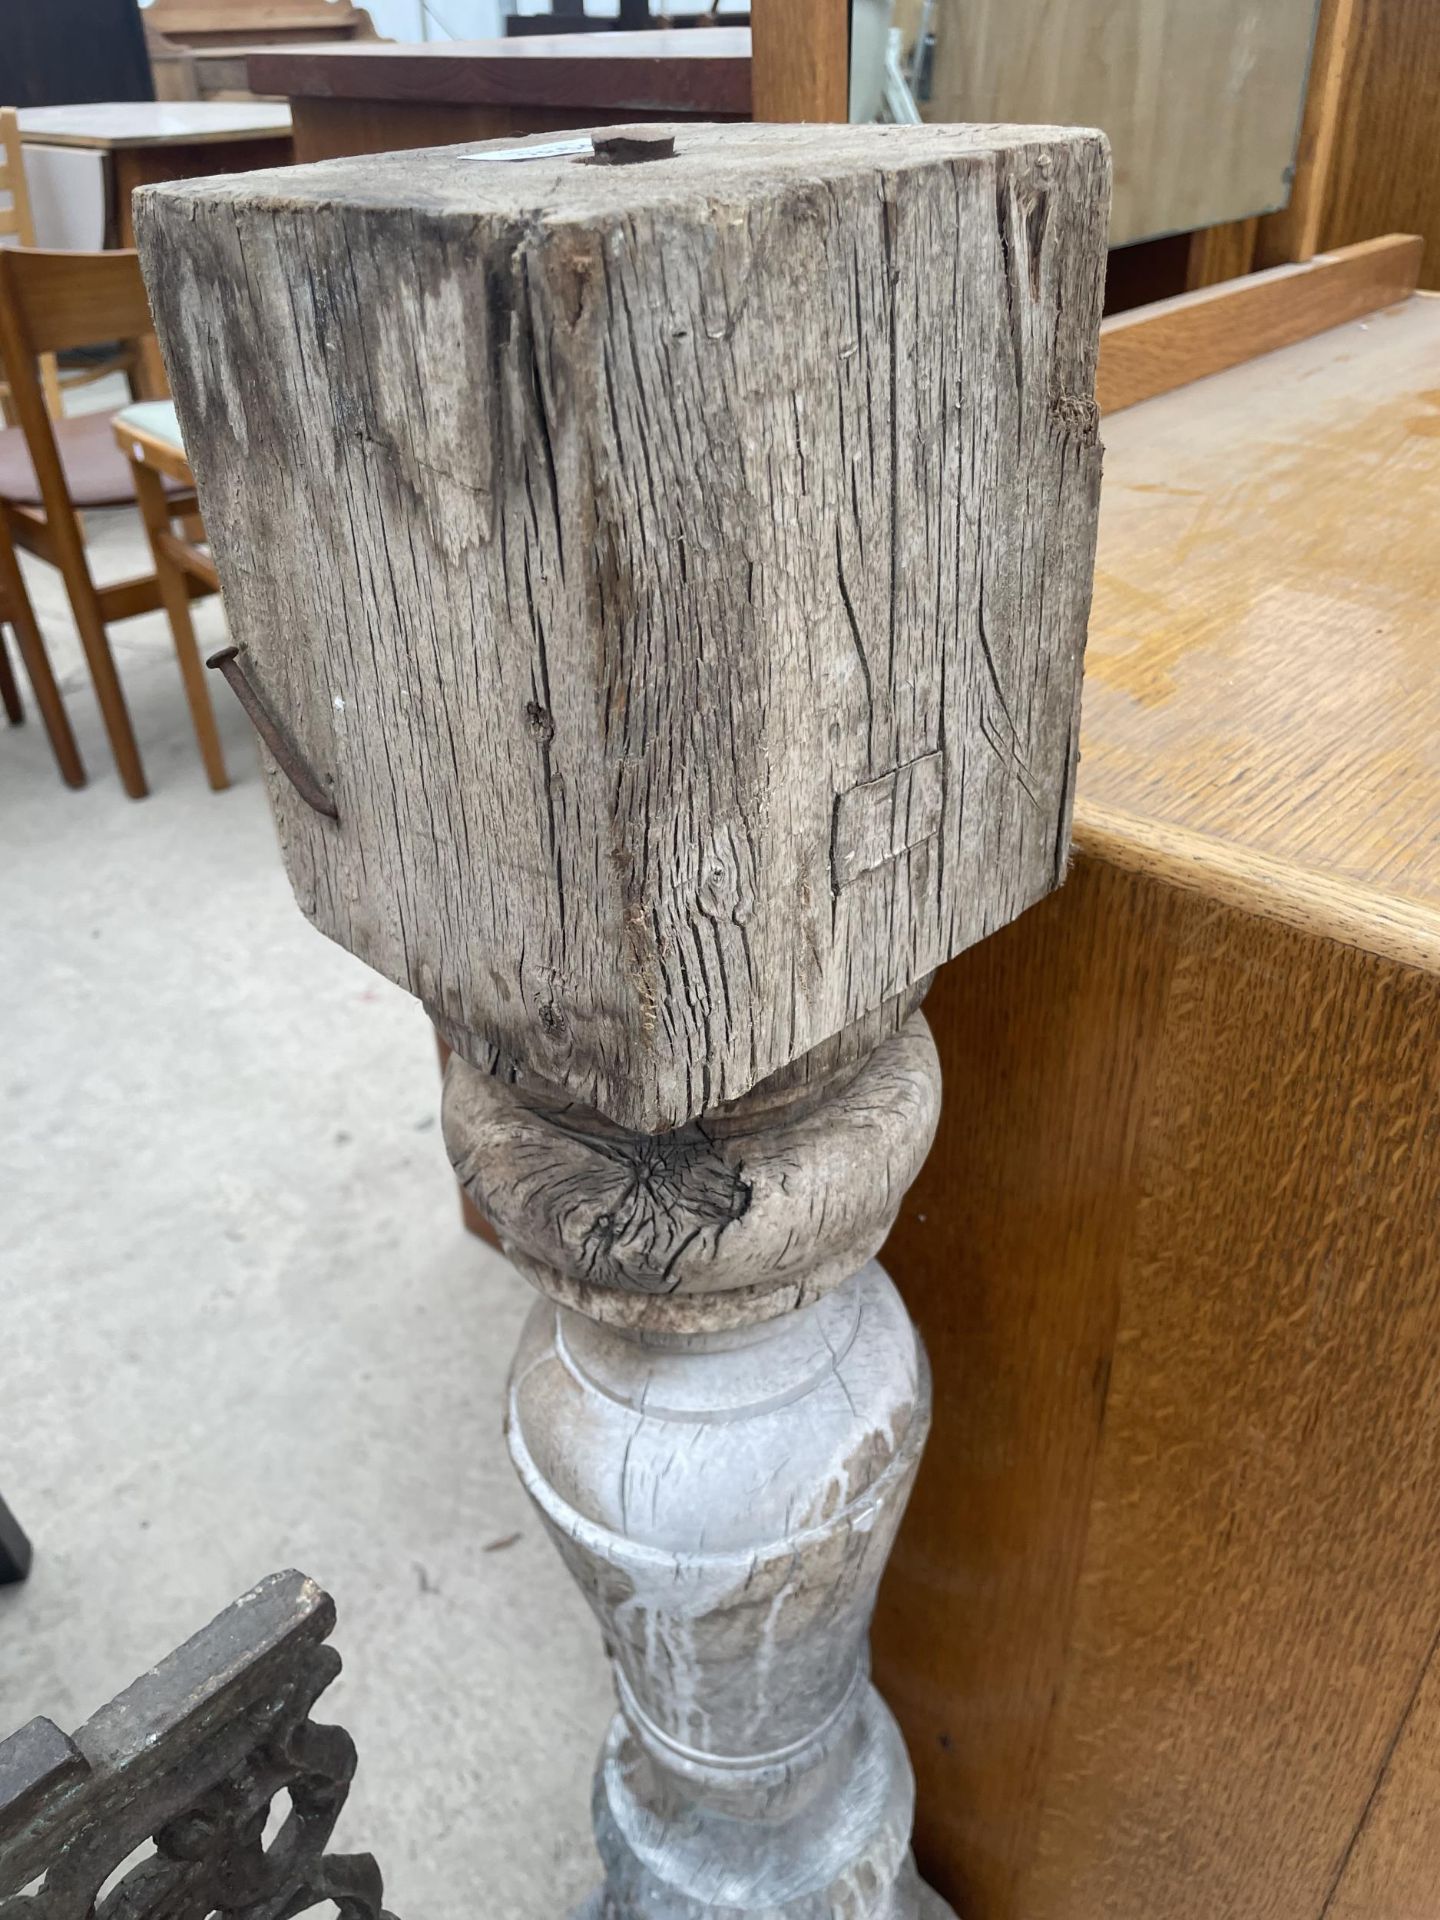 A VINTAGE WOODEN COLUMN STAND - Image 2 of 3